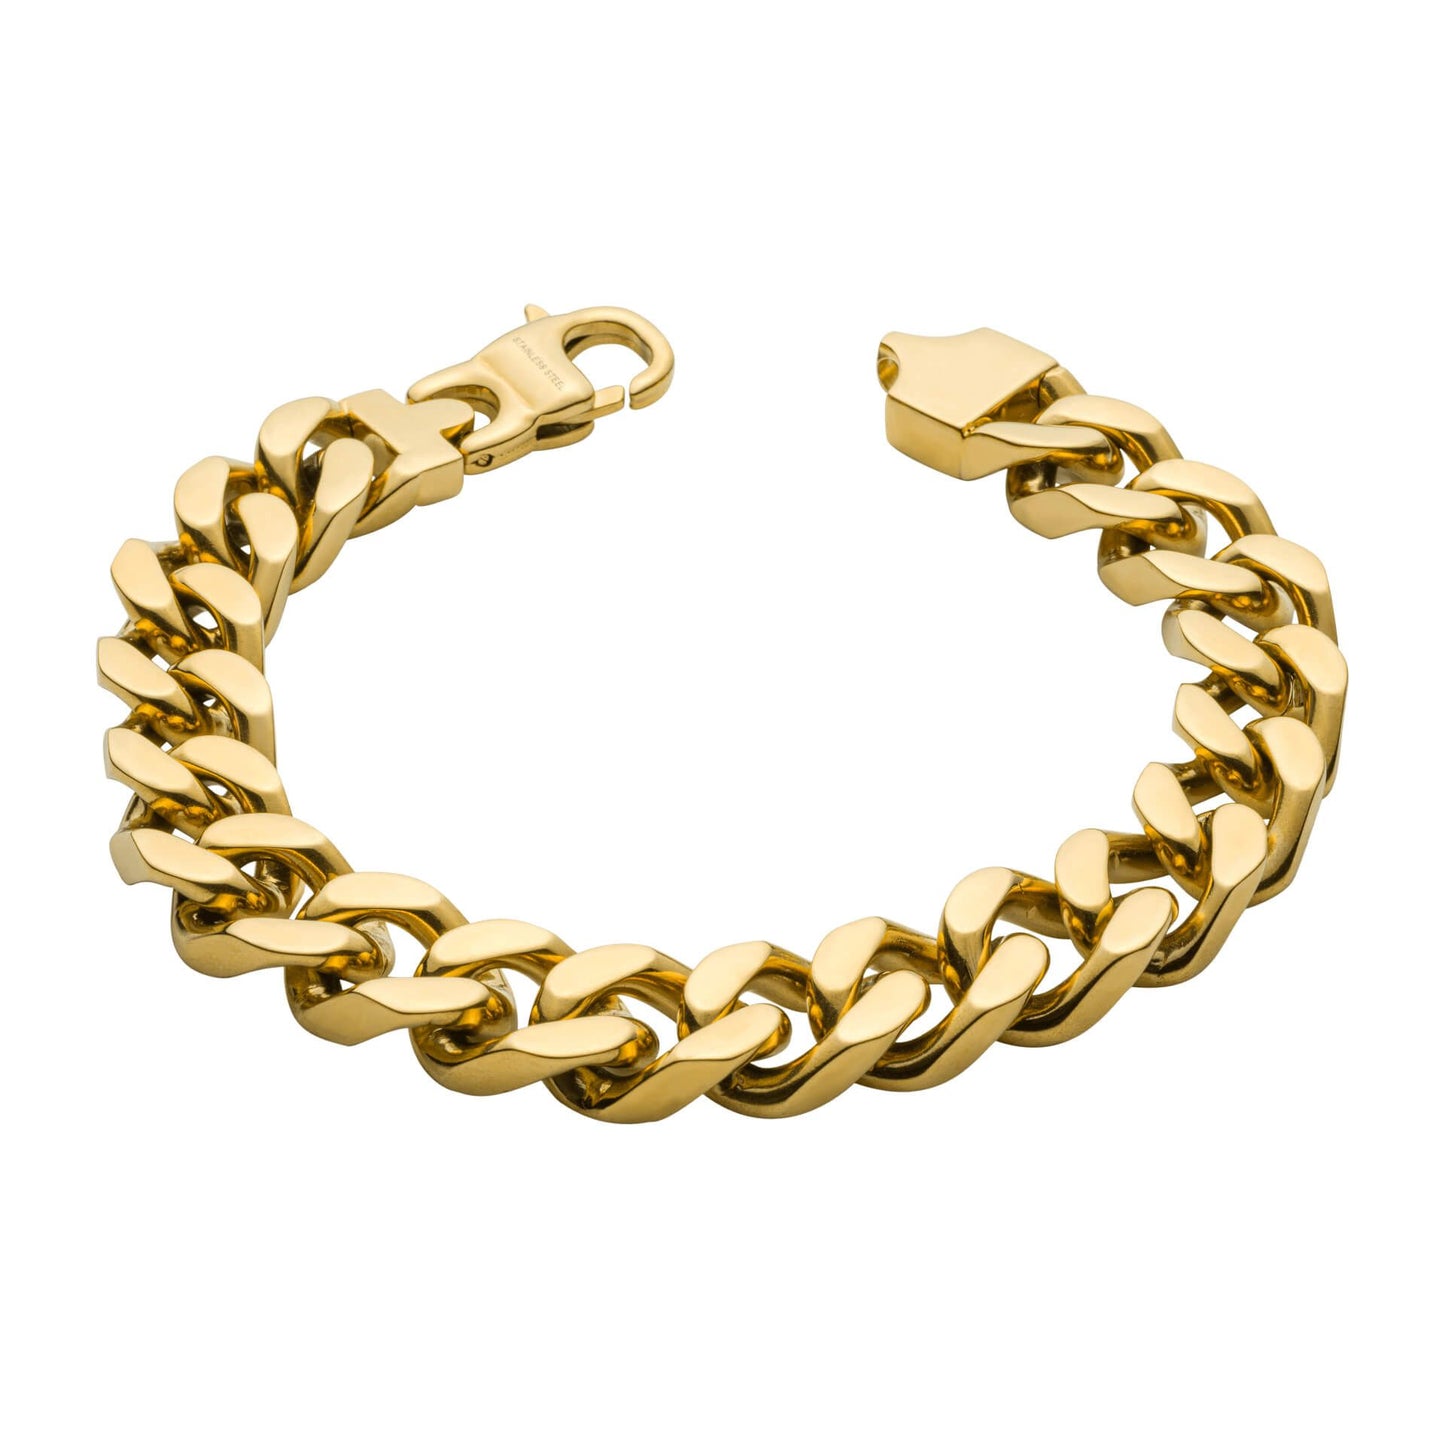 Men's heavy gold plated 8.5 inch curb bracelet